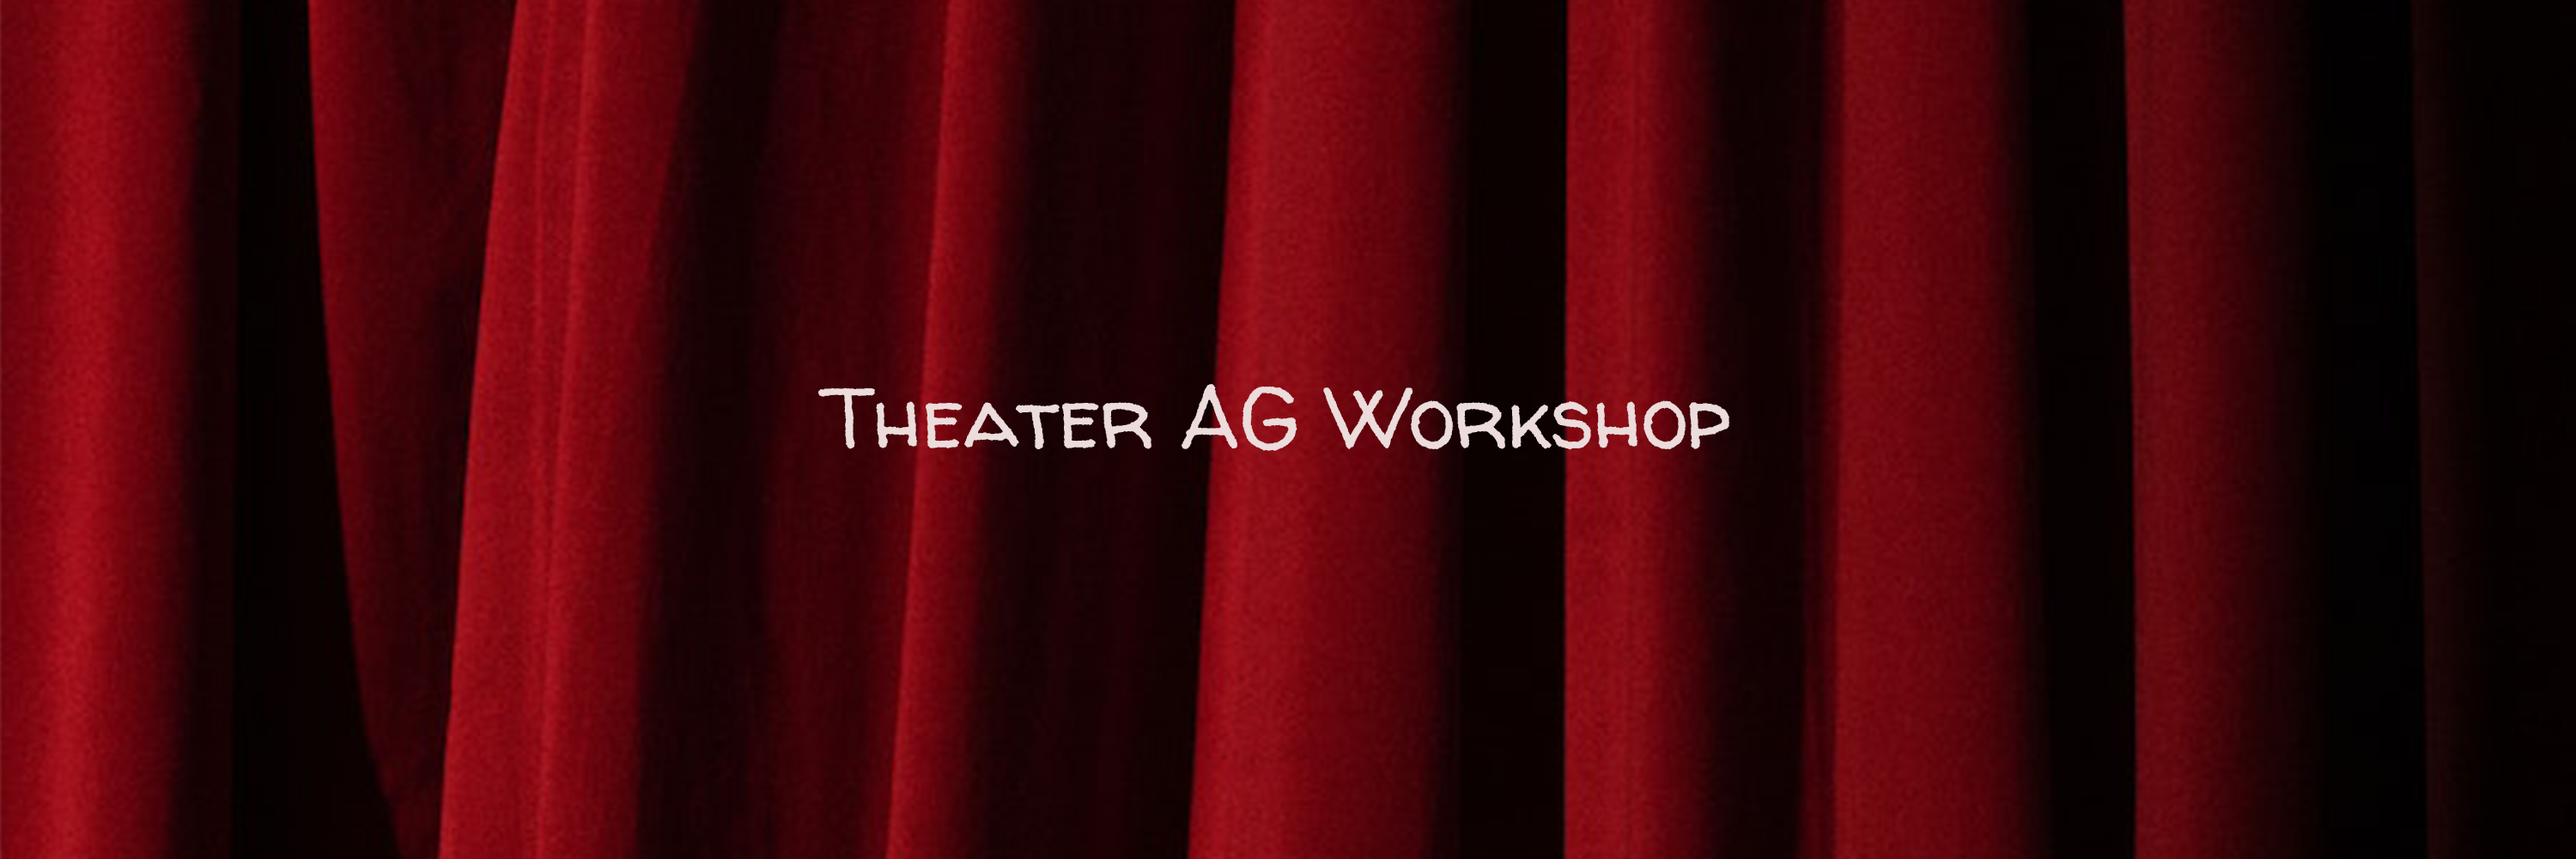 Theater-AG-Workshop